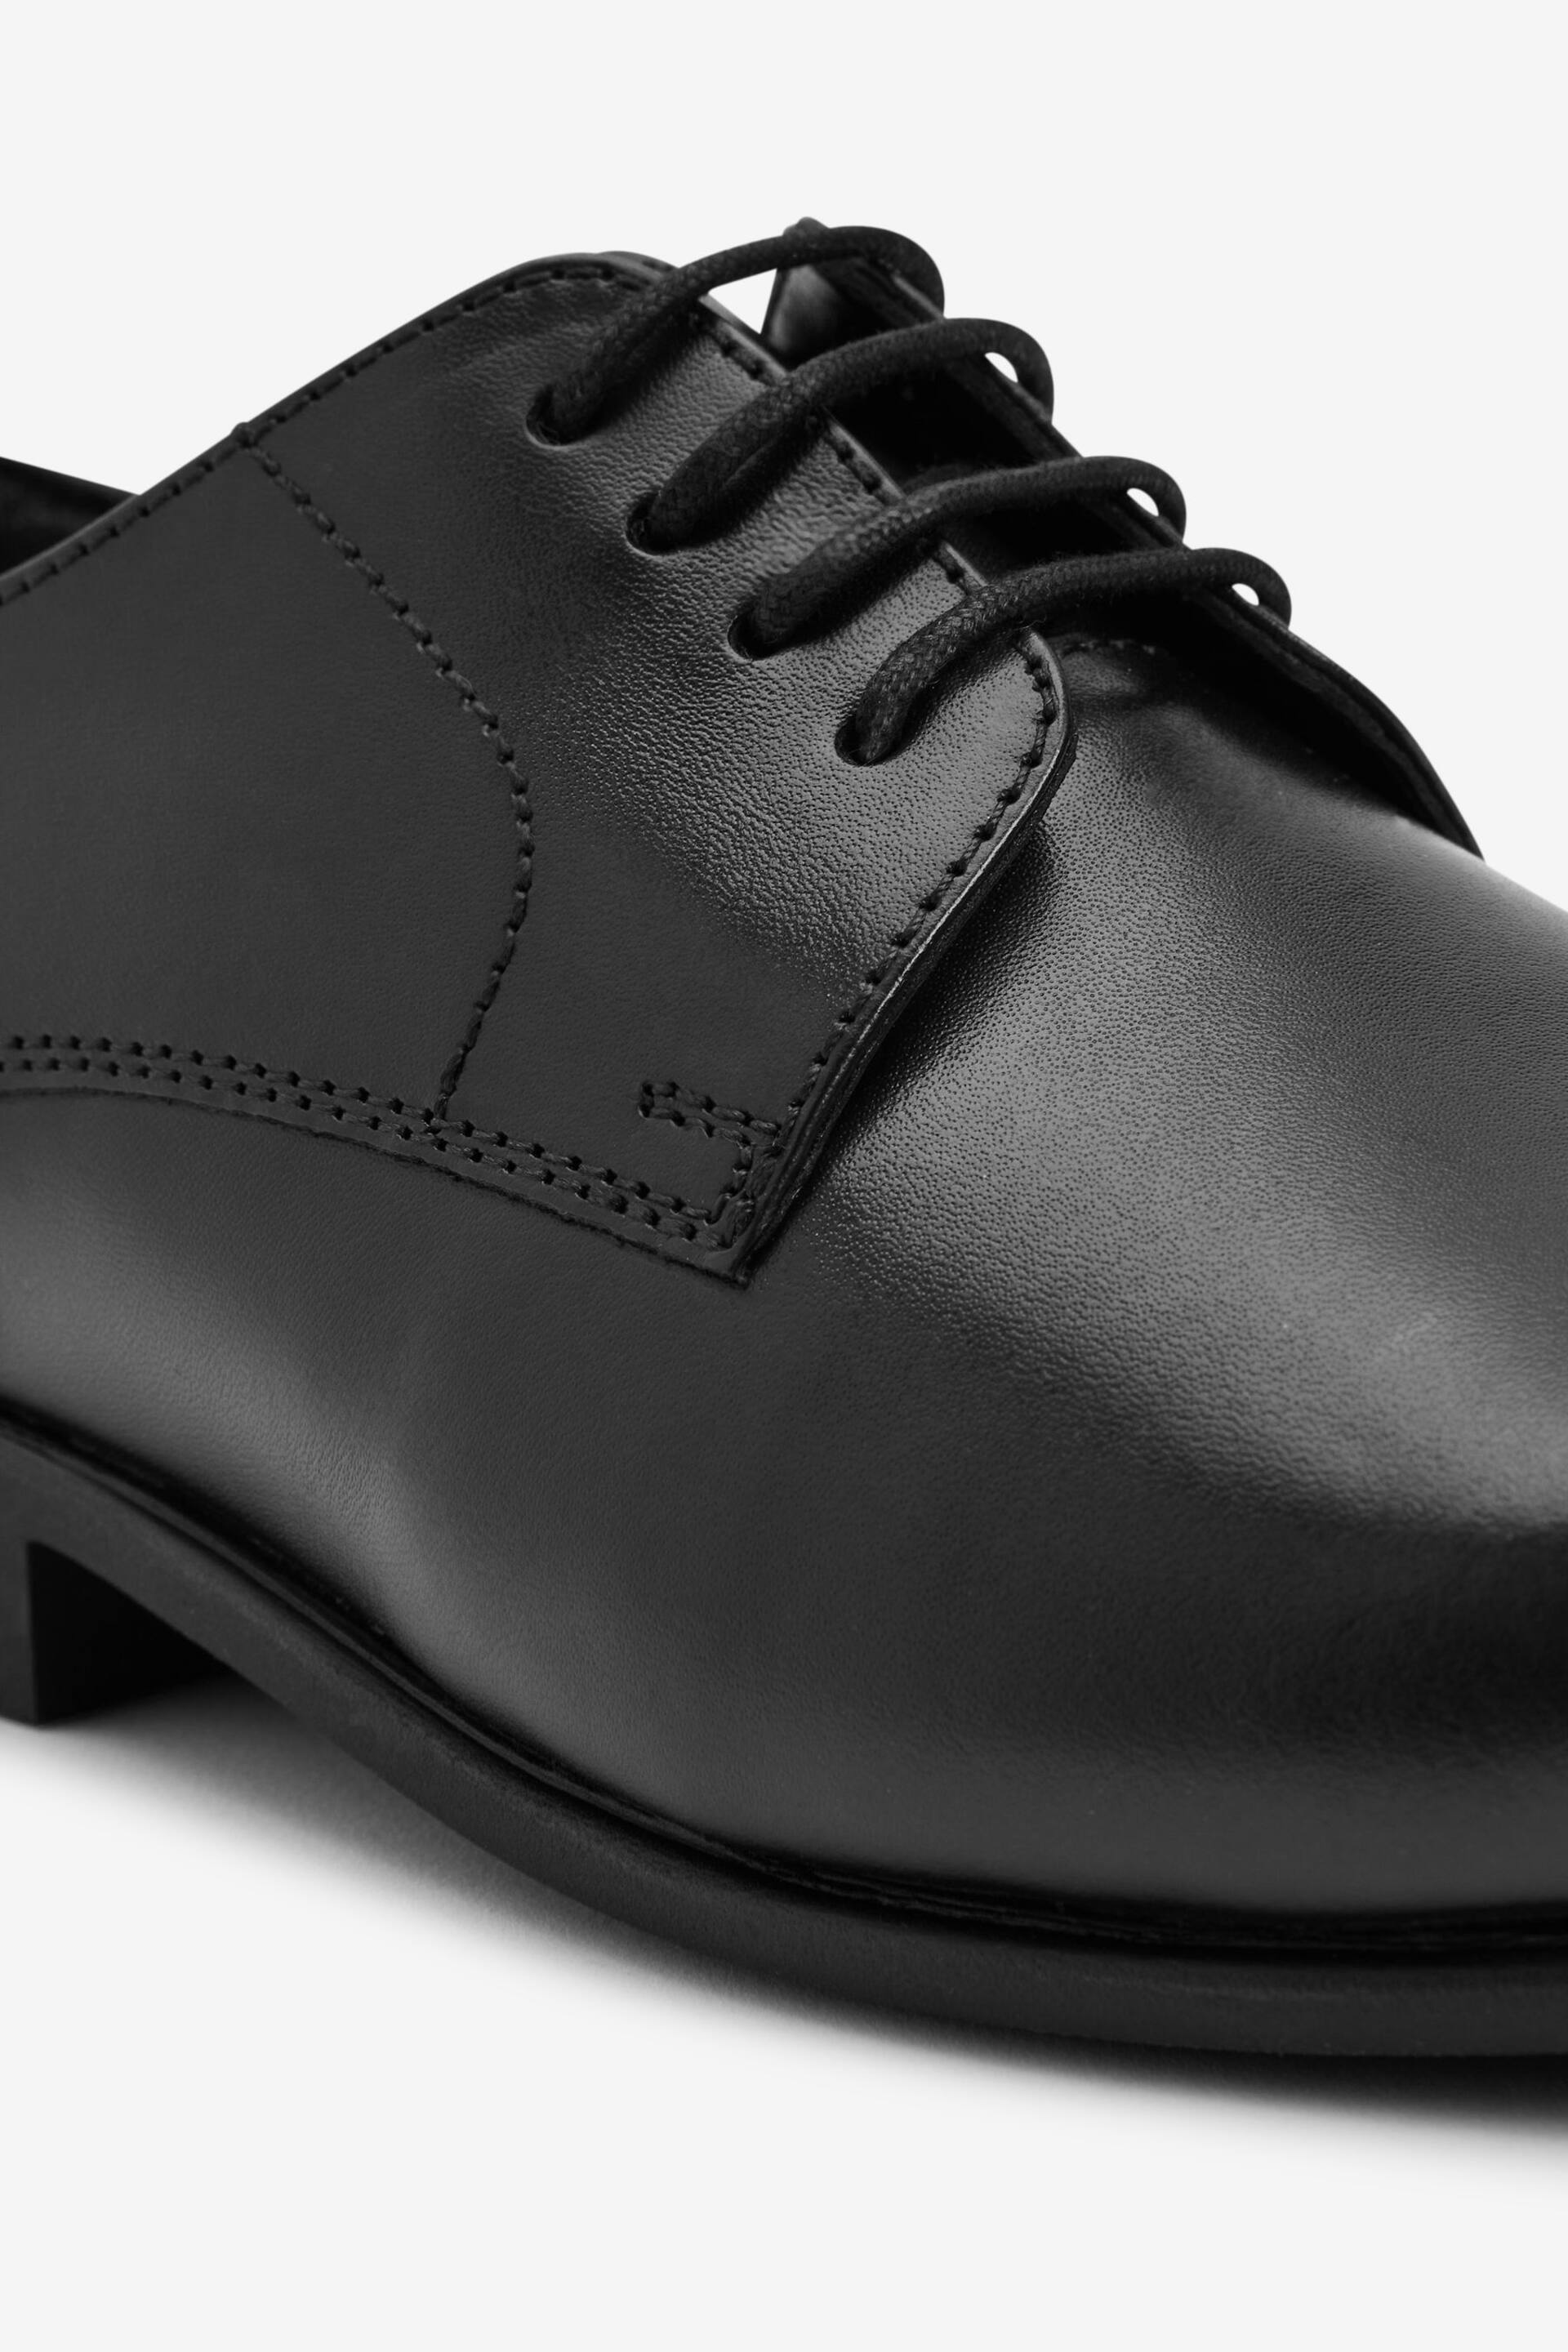 Black Wide Fit (G) School Leather Lace Up Shoes - Image 6 of 9